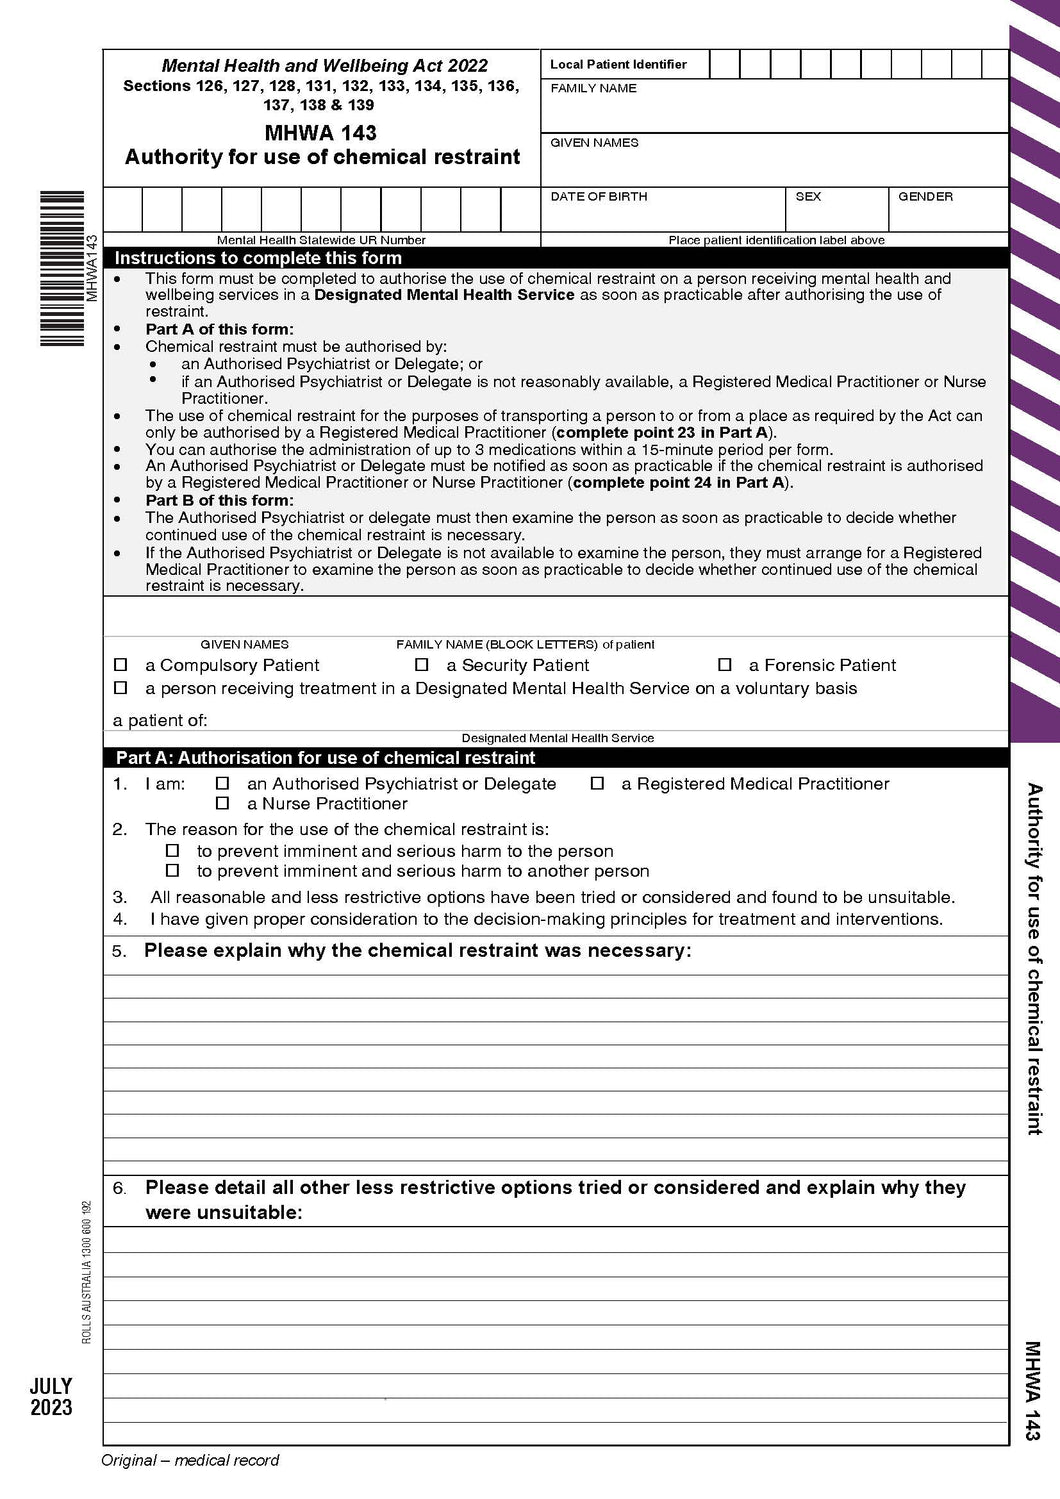 MHWA143 Authority for Chemical Restraint 4 Page NCR